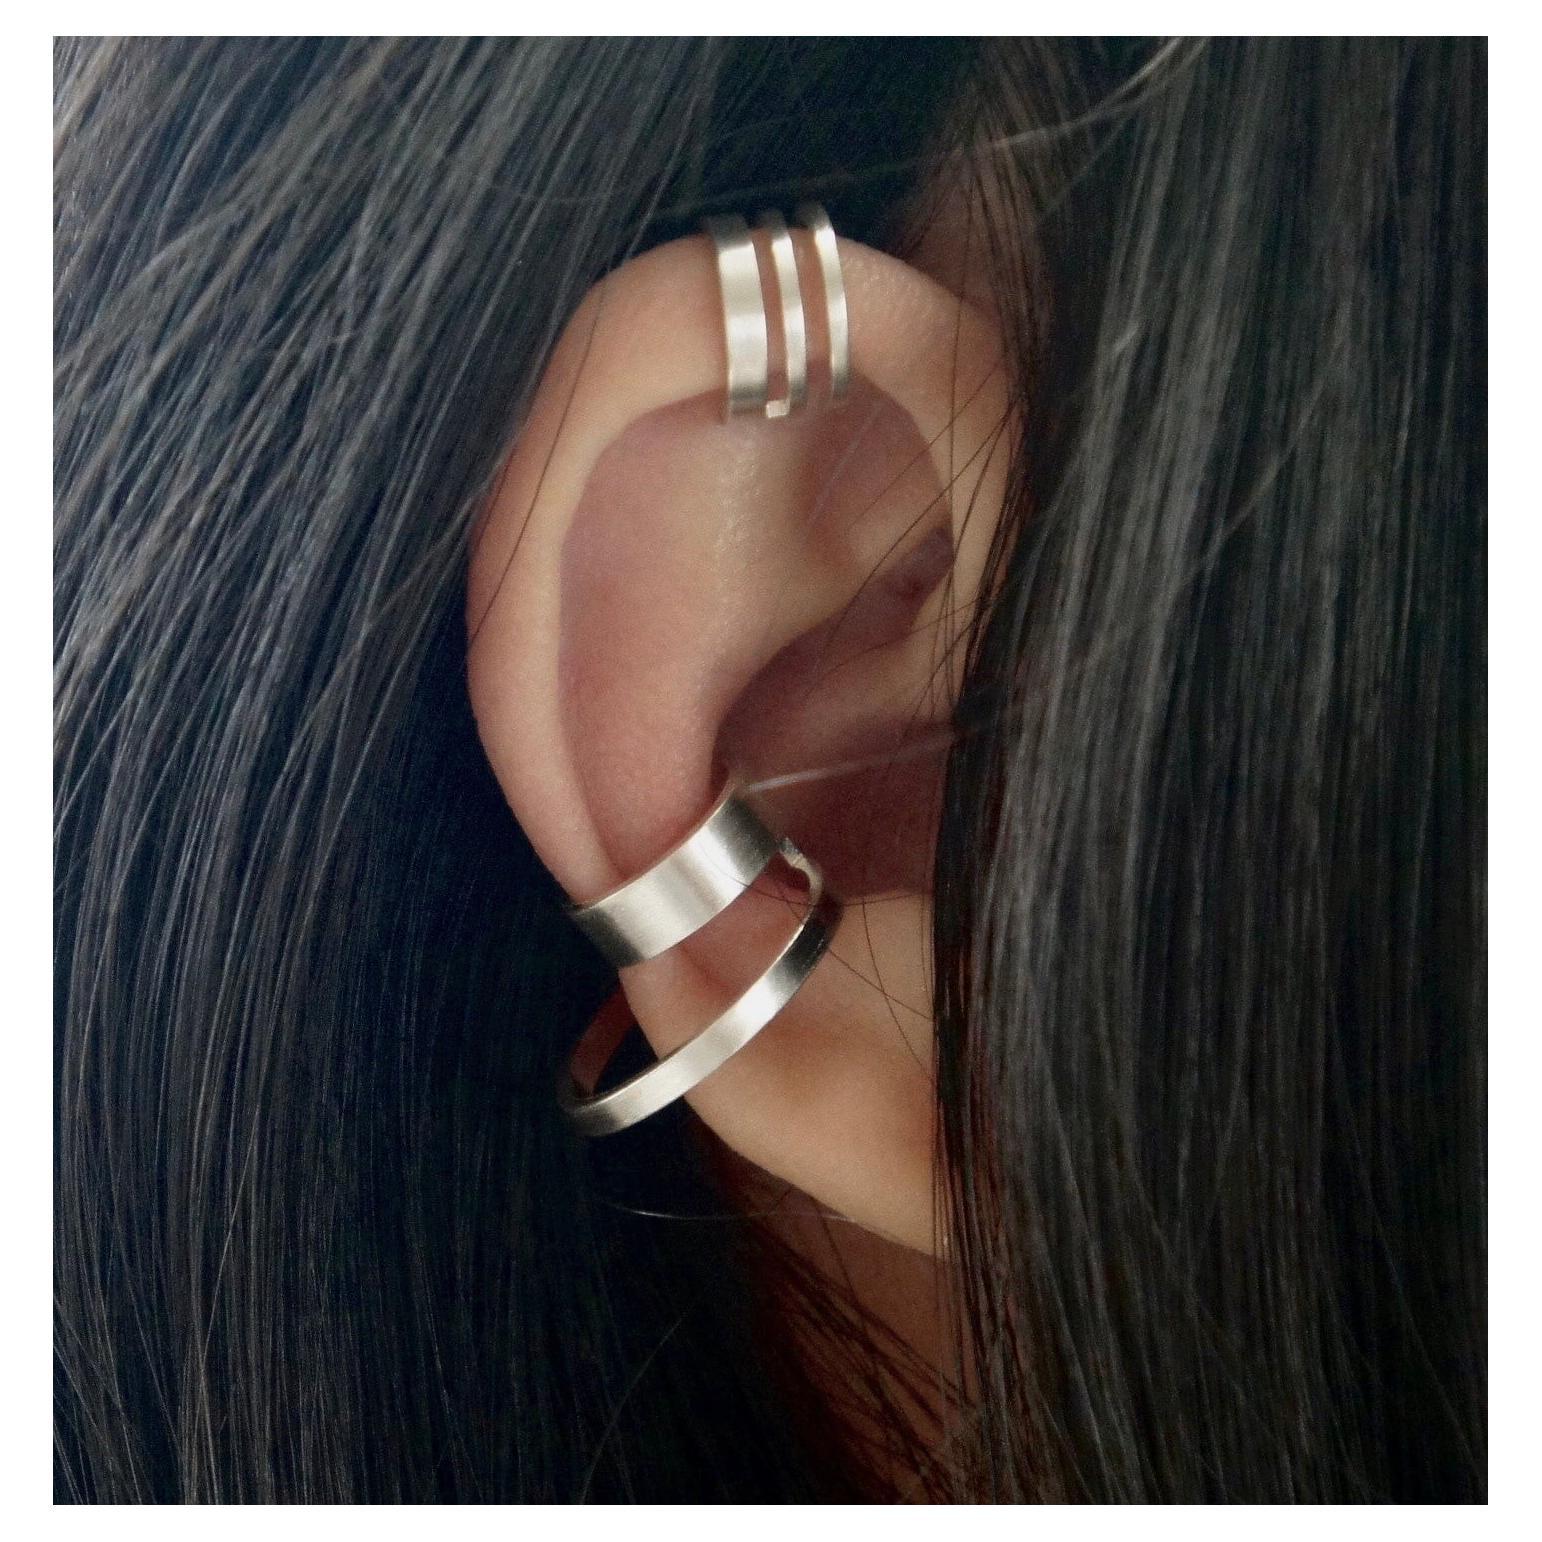 Unfinishing Line collection exudes minimalism and precision with its smooth lines and angles. Detail with a curved structure and cut out details. Lines Earcuff is perfect for day to night wear due to the simplistic neat design which can be paired